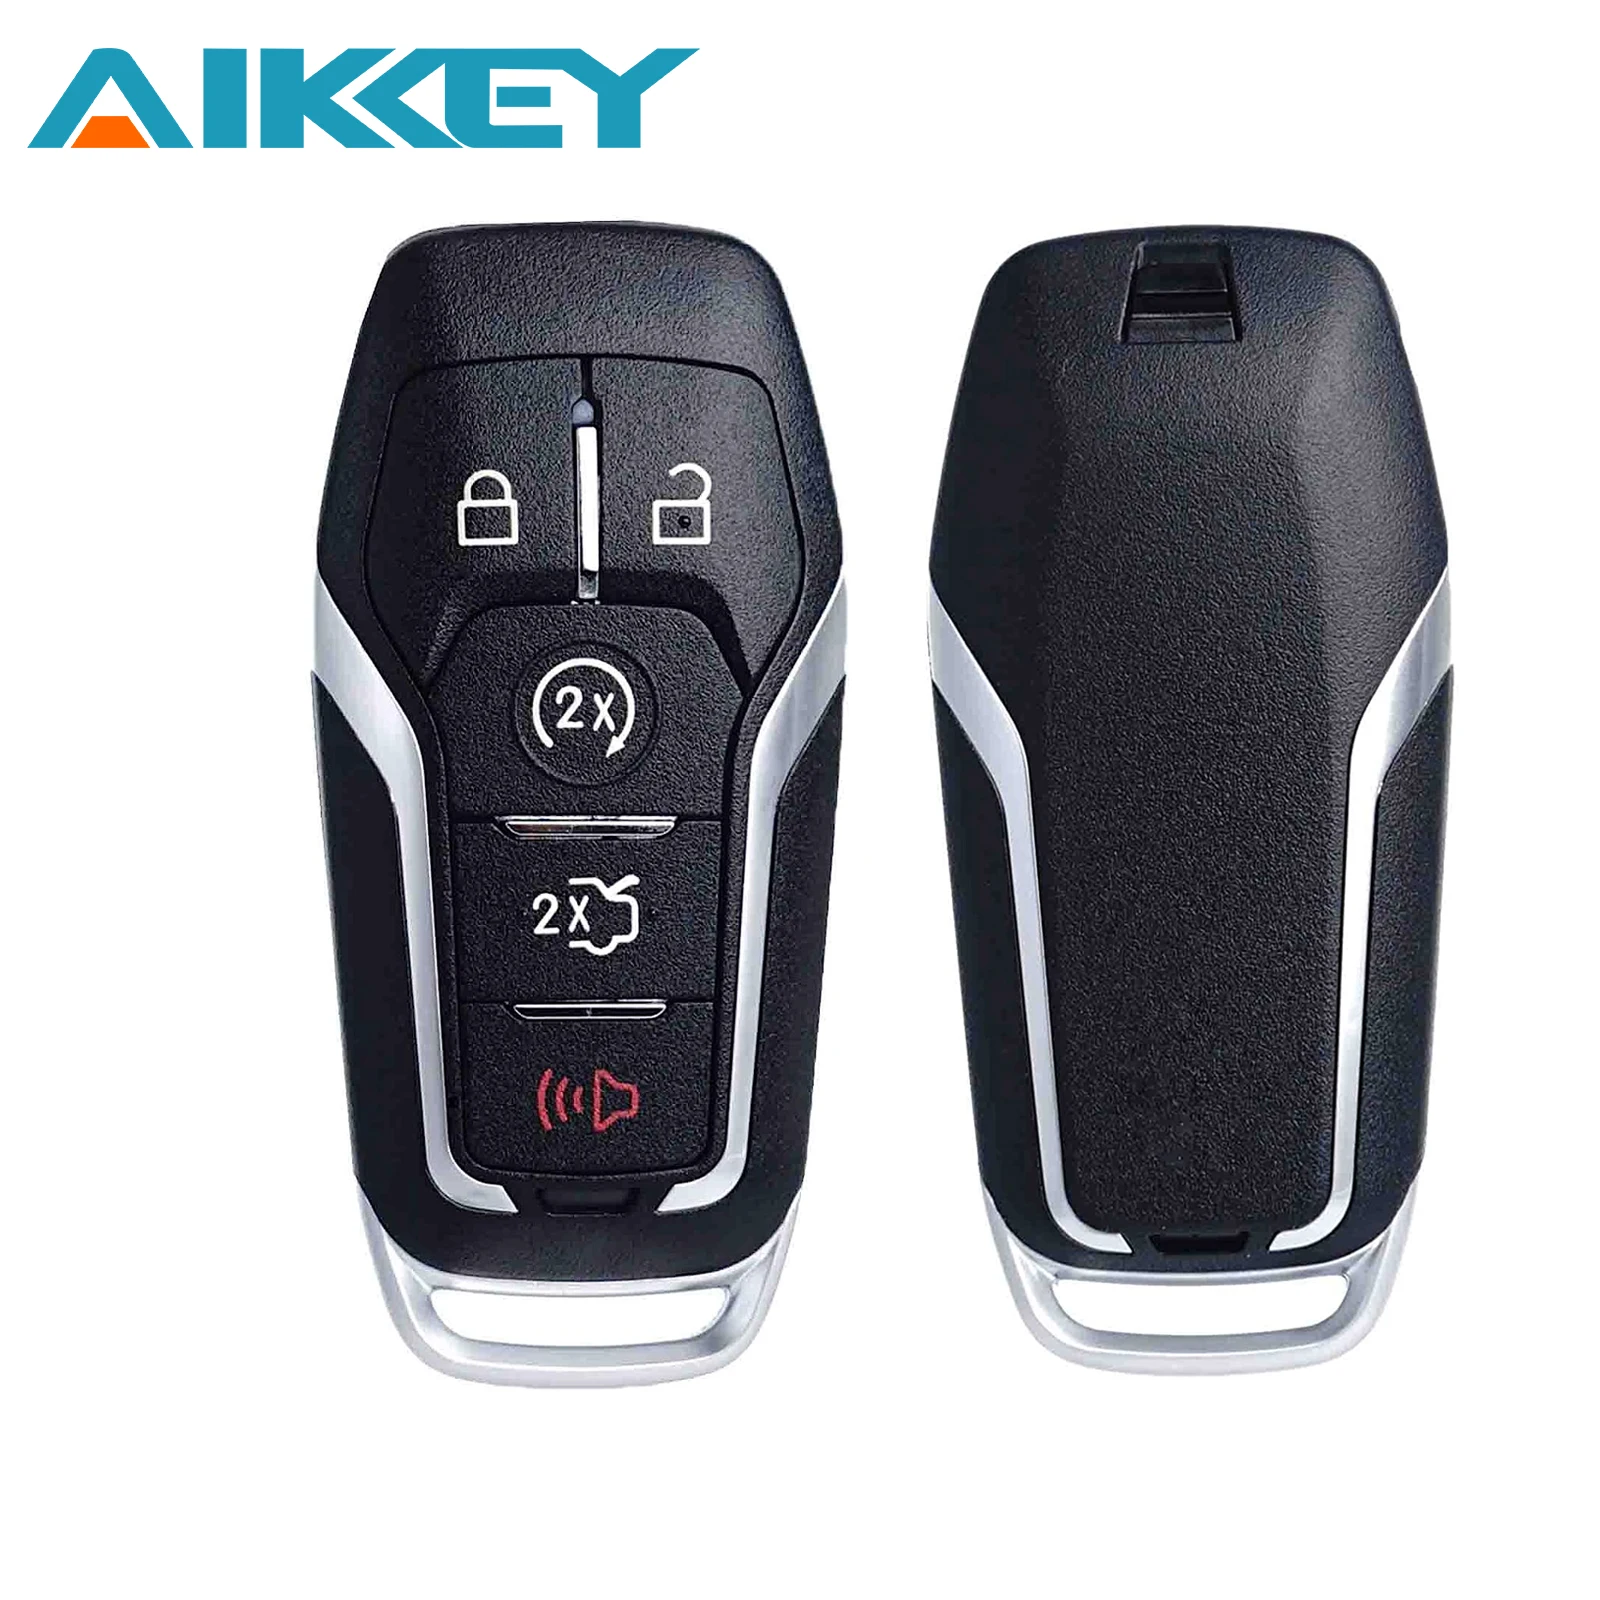 

AIK Car Remote Key For Ford Fusion Explorer Edge Mustang 2013-2017 M3N-A2C31243300 902MHz ID49 Chip FSK Car Accessories